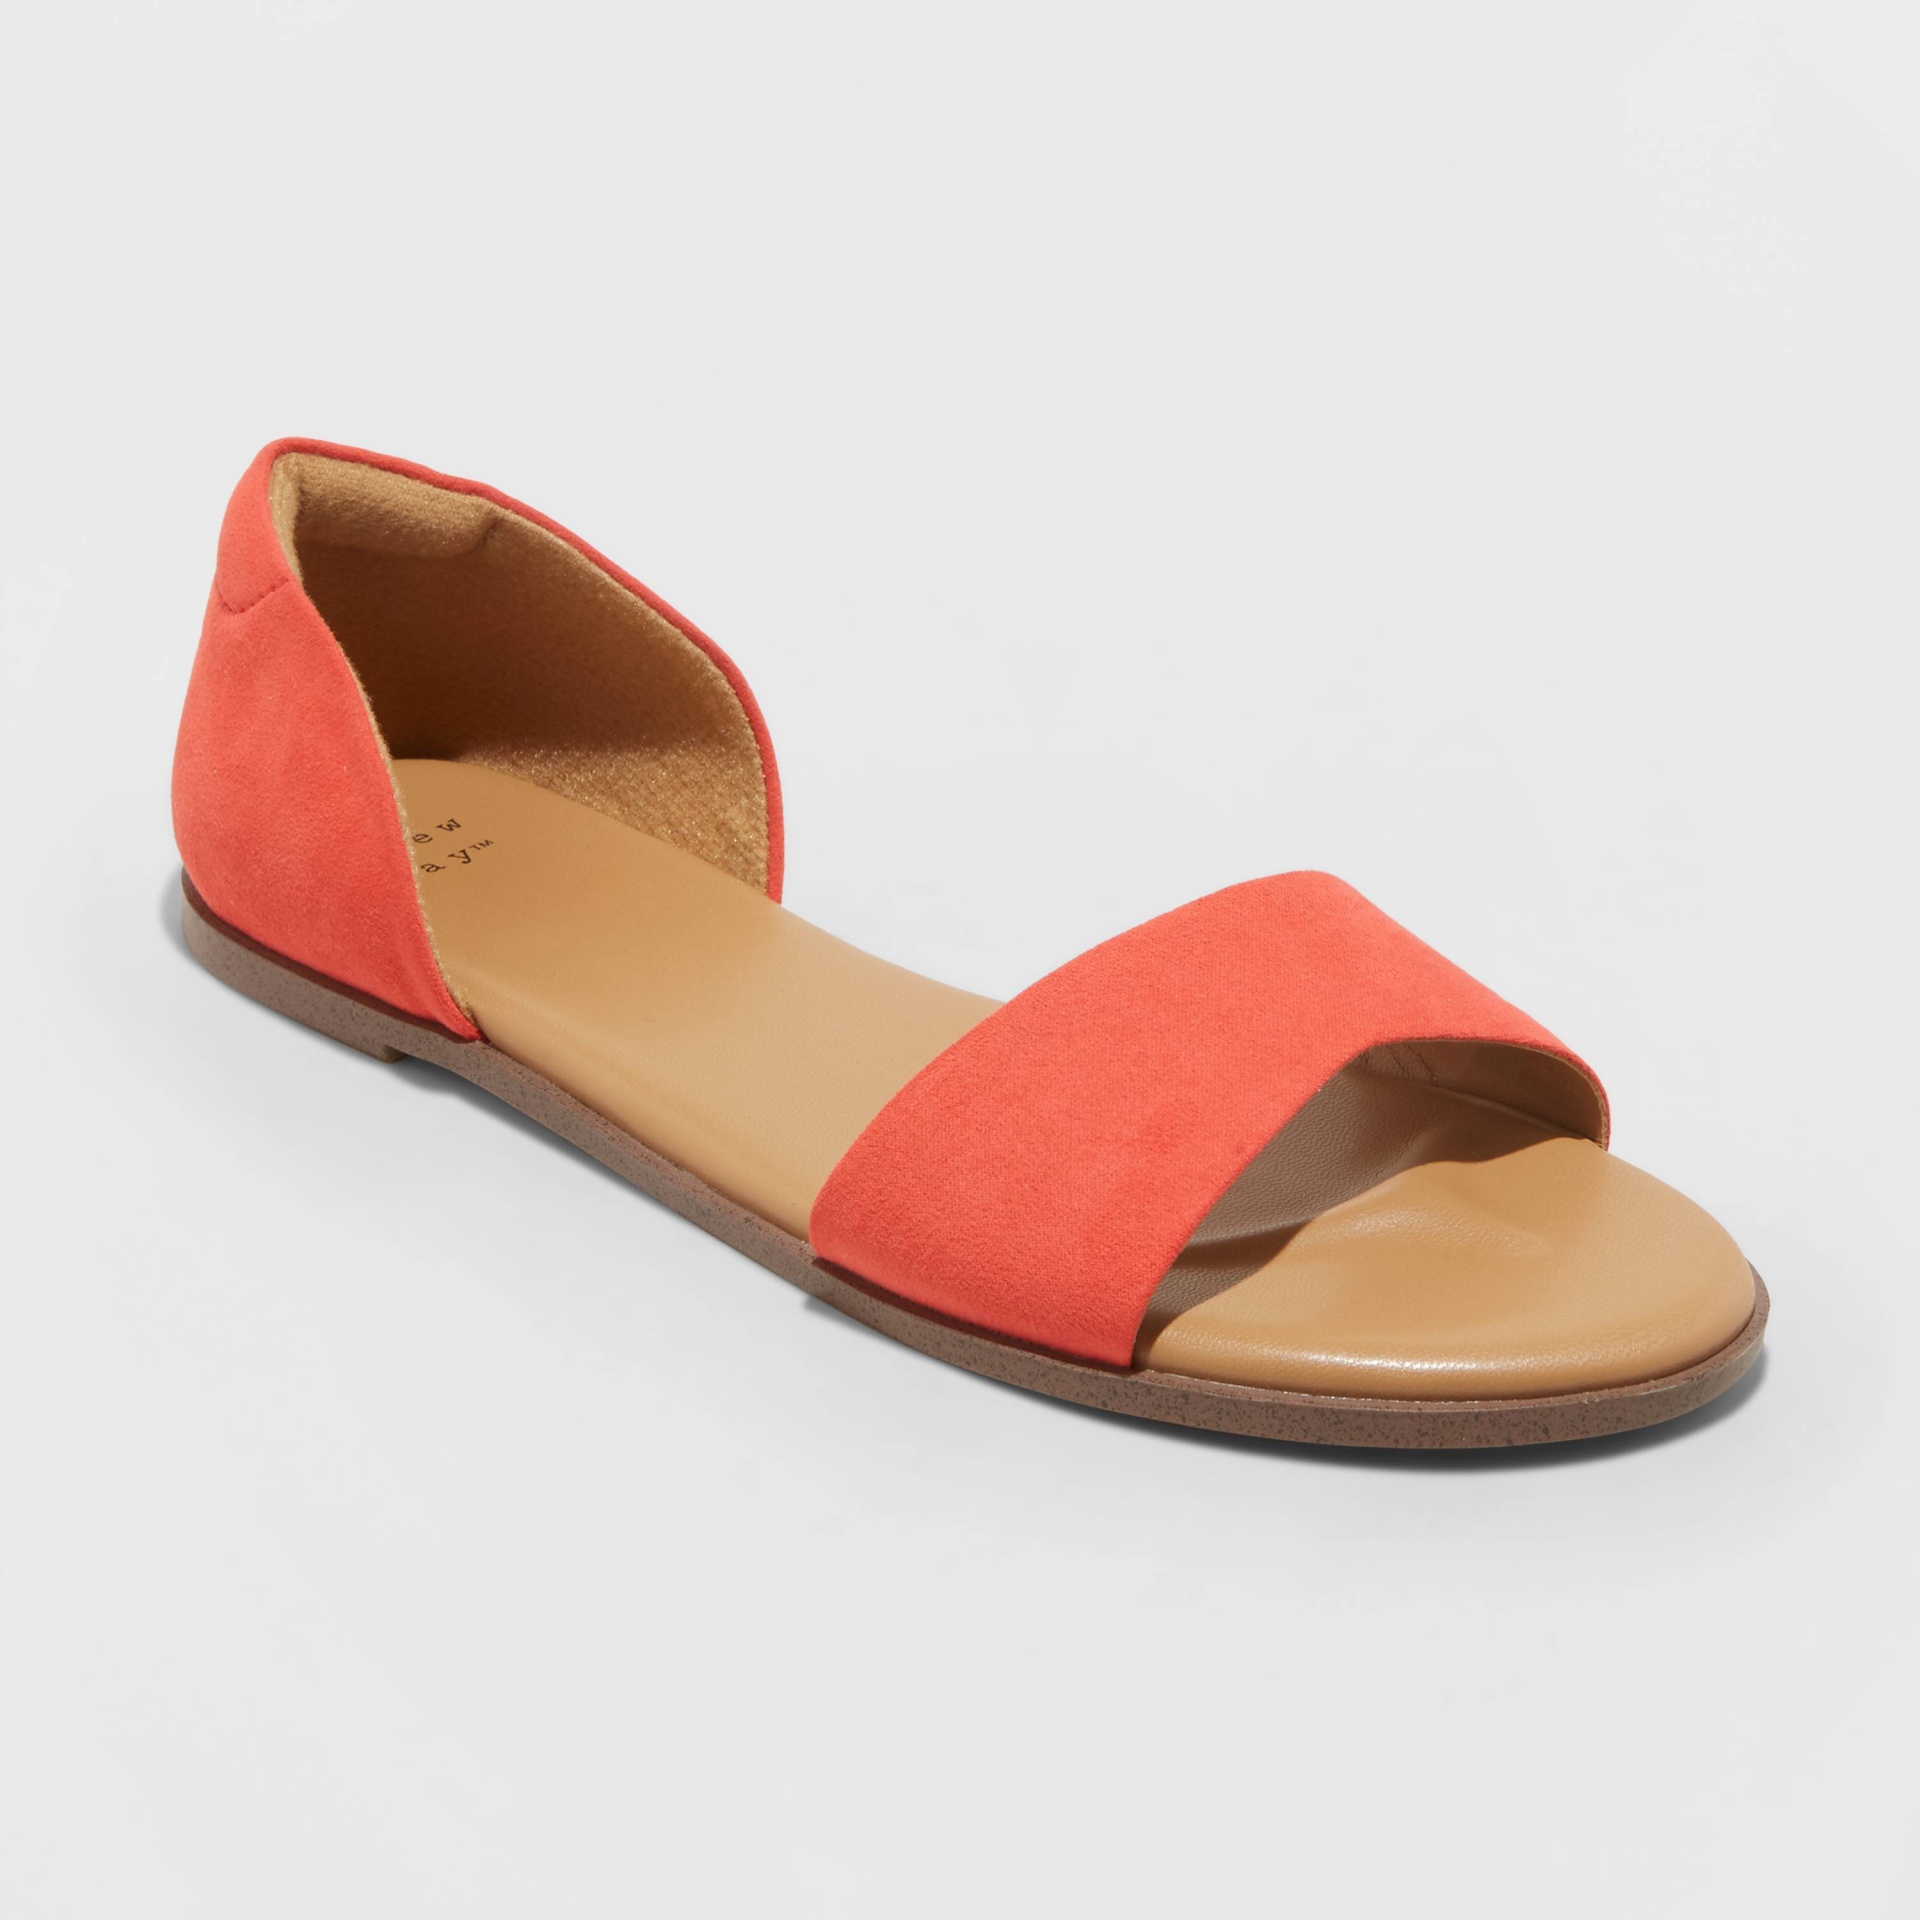 slide 1 of 4, Women's Ann Two Piece Slide Sandals - A New Day Coral 9.5, 1 ct